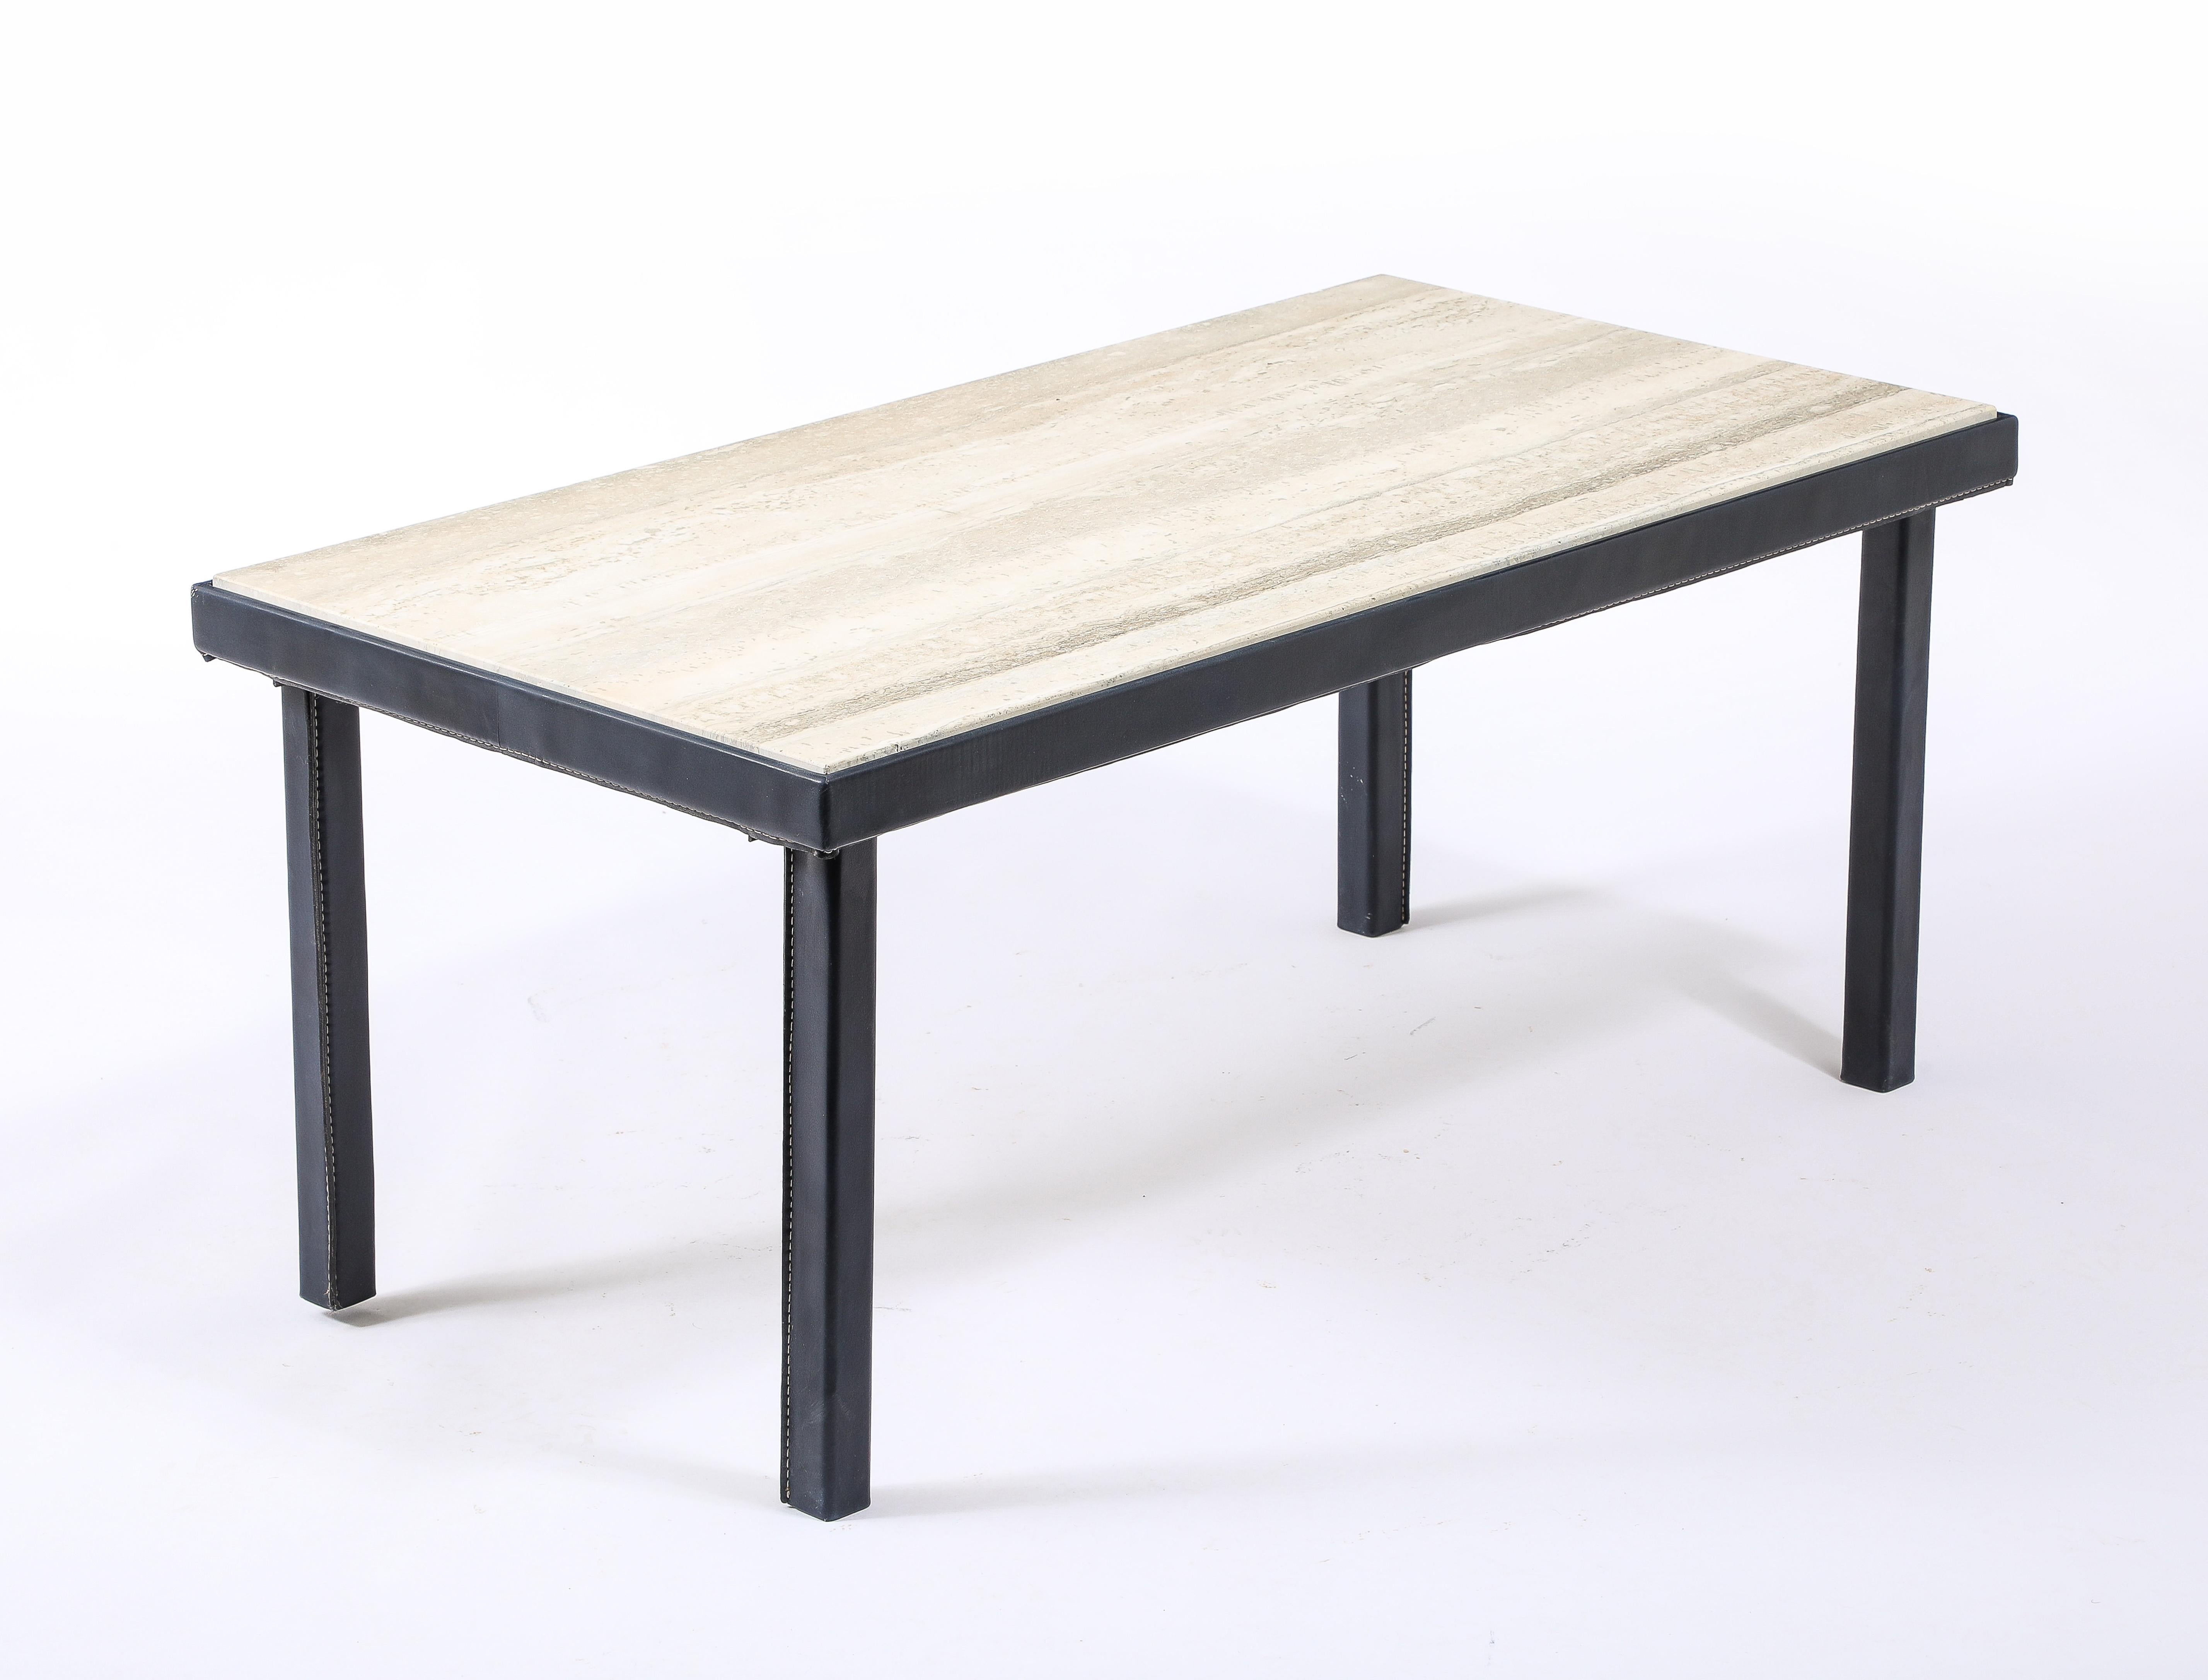 French Jacques Adnet Stitched Blue Leather & Travertine Coffee Table, France 1950's For Sale